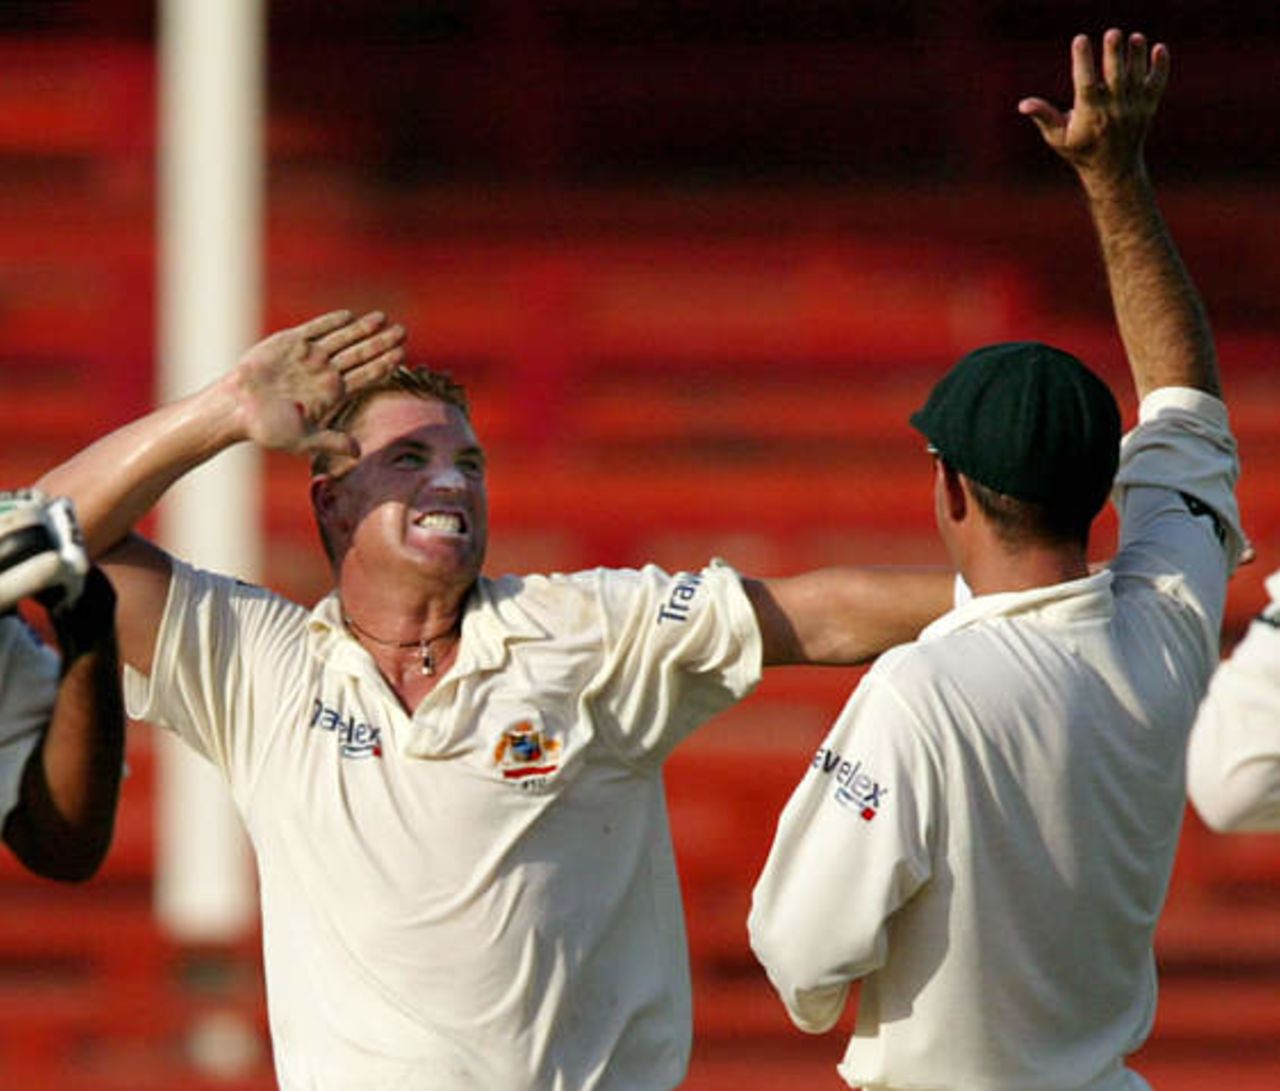 Australian spin bowler Shane Warne celebrates winning the second cricket test match against Pakistan with team mate Ricky Ponting (R) at Sharjah's stadium October 12, 2002. Pakistan crumbled to defeat in less than two days of the second test against Australia on Saturday, adding just 53 to their first innings 59 and losing by an innings and 198 runs. Pakistan's match total of 112 was the fourth worst in test history.